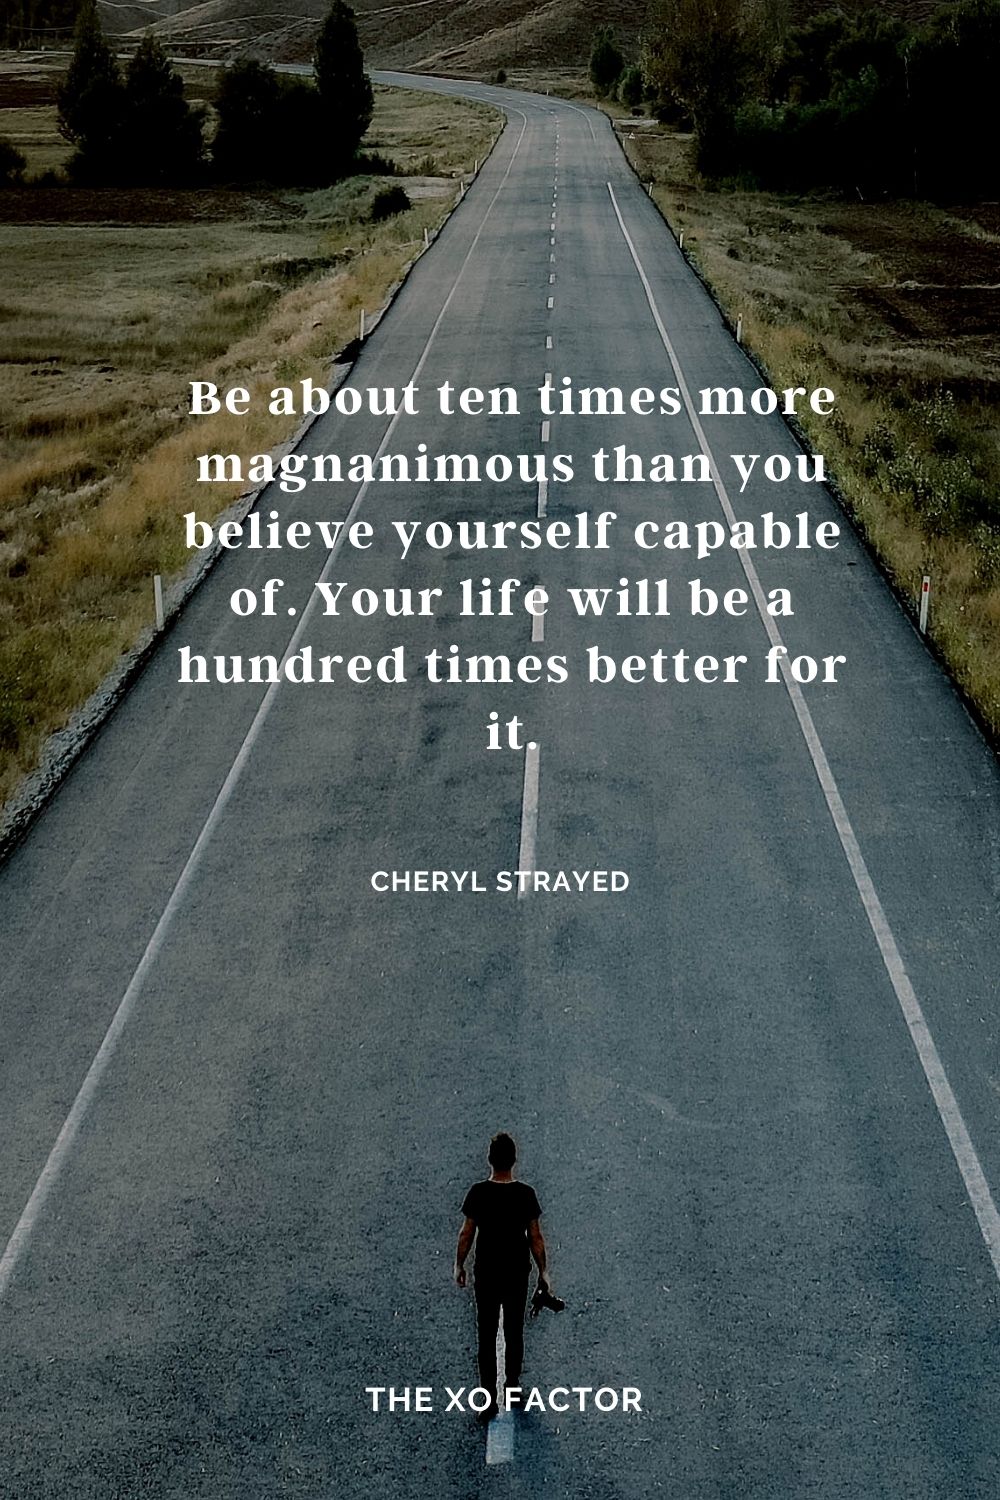 Be about ten times more magnanimous than you believe yourself capable of. Your life will be a hundred times better for it. Cheryl Strayed